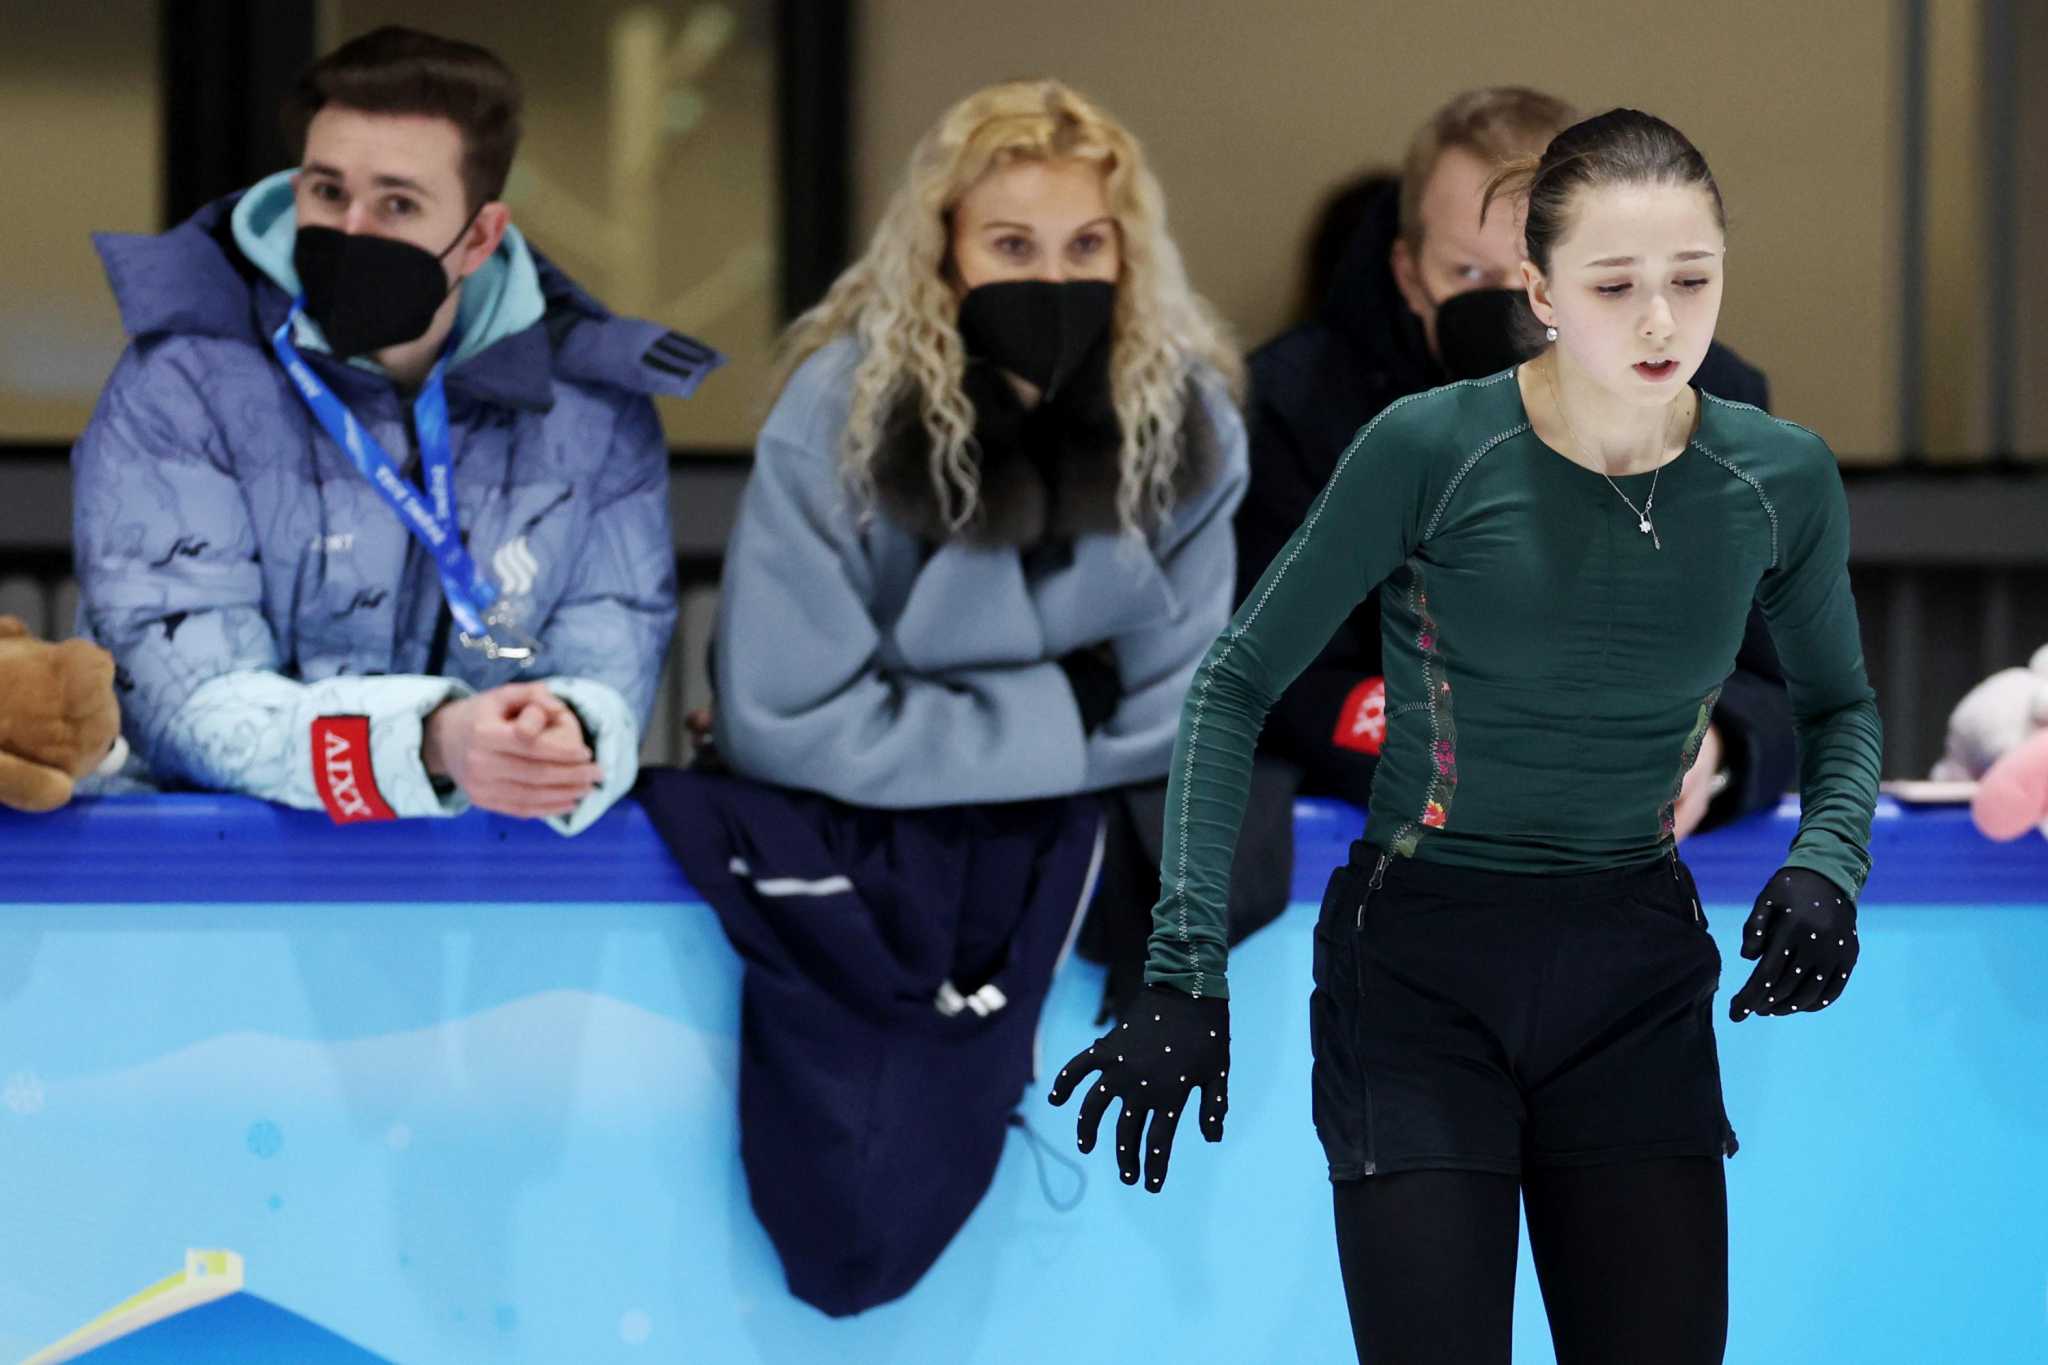 Letting Russian figure skater compete turns Olympics into a punchline